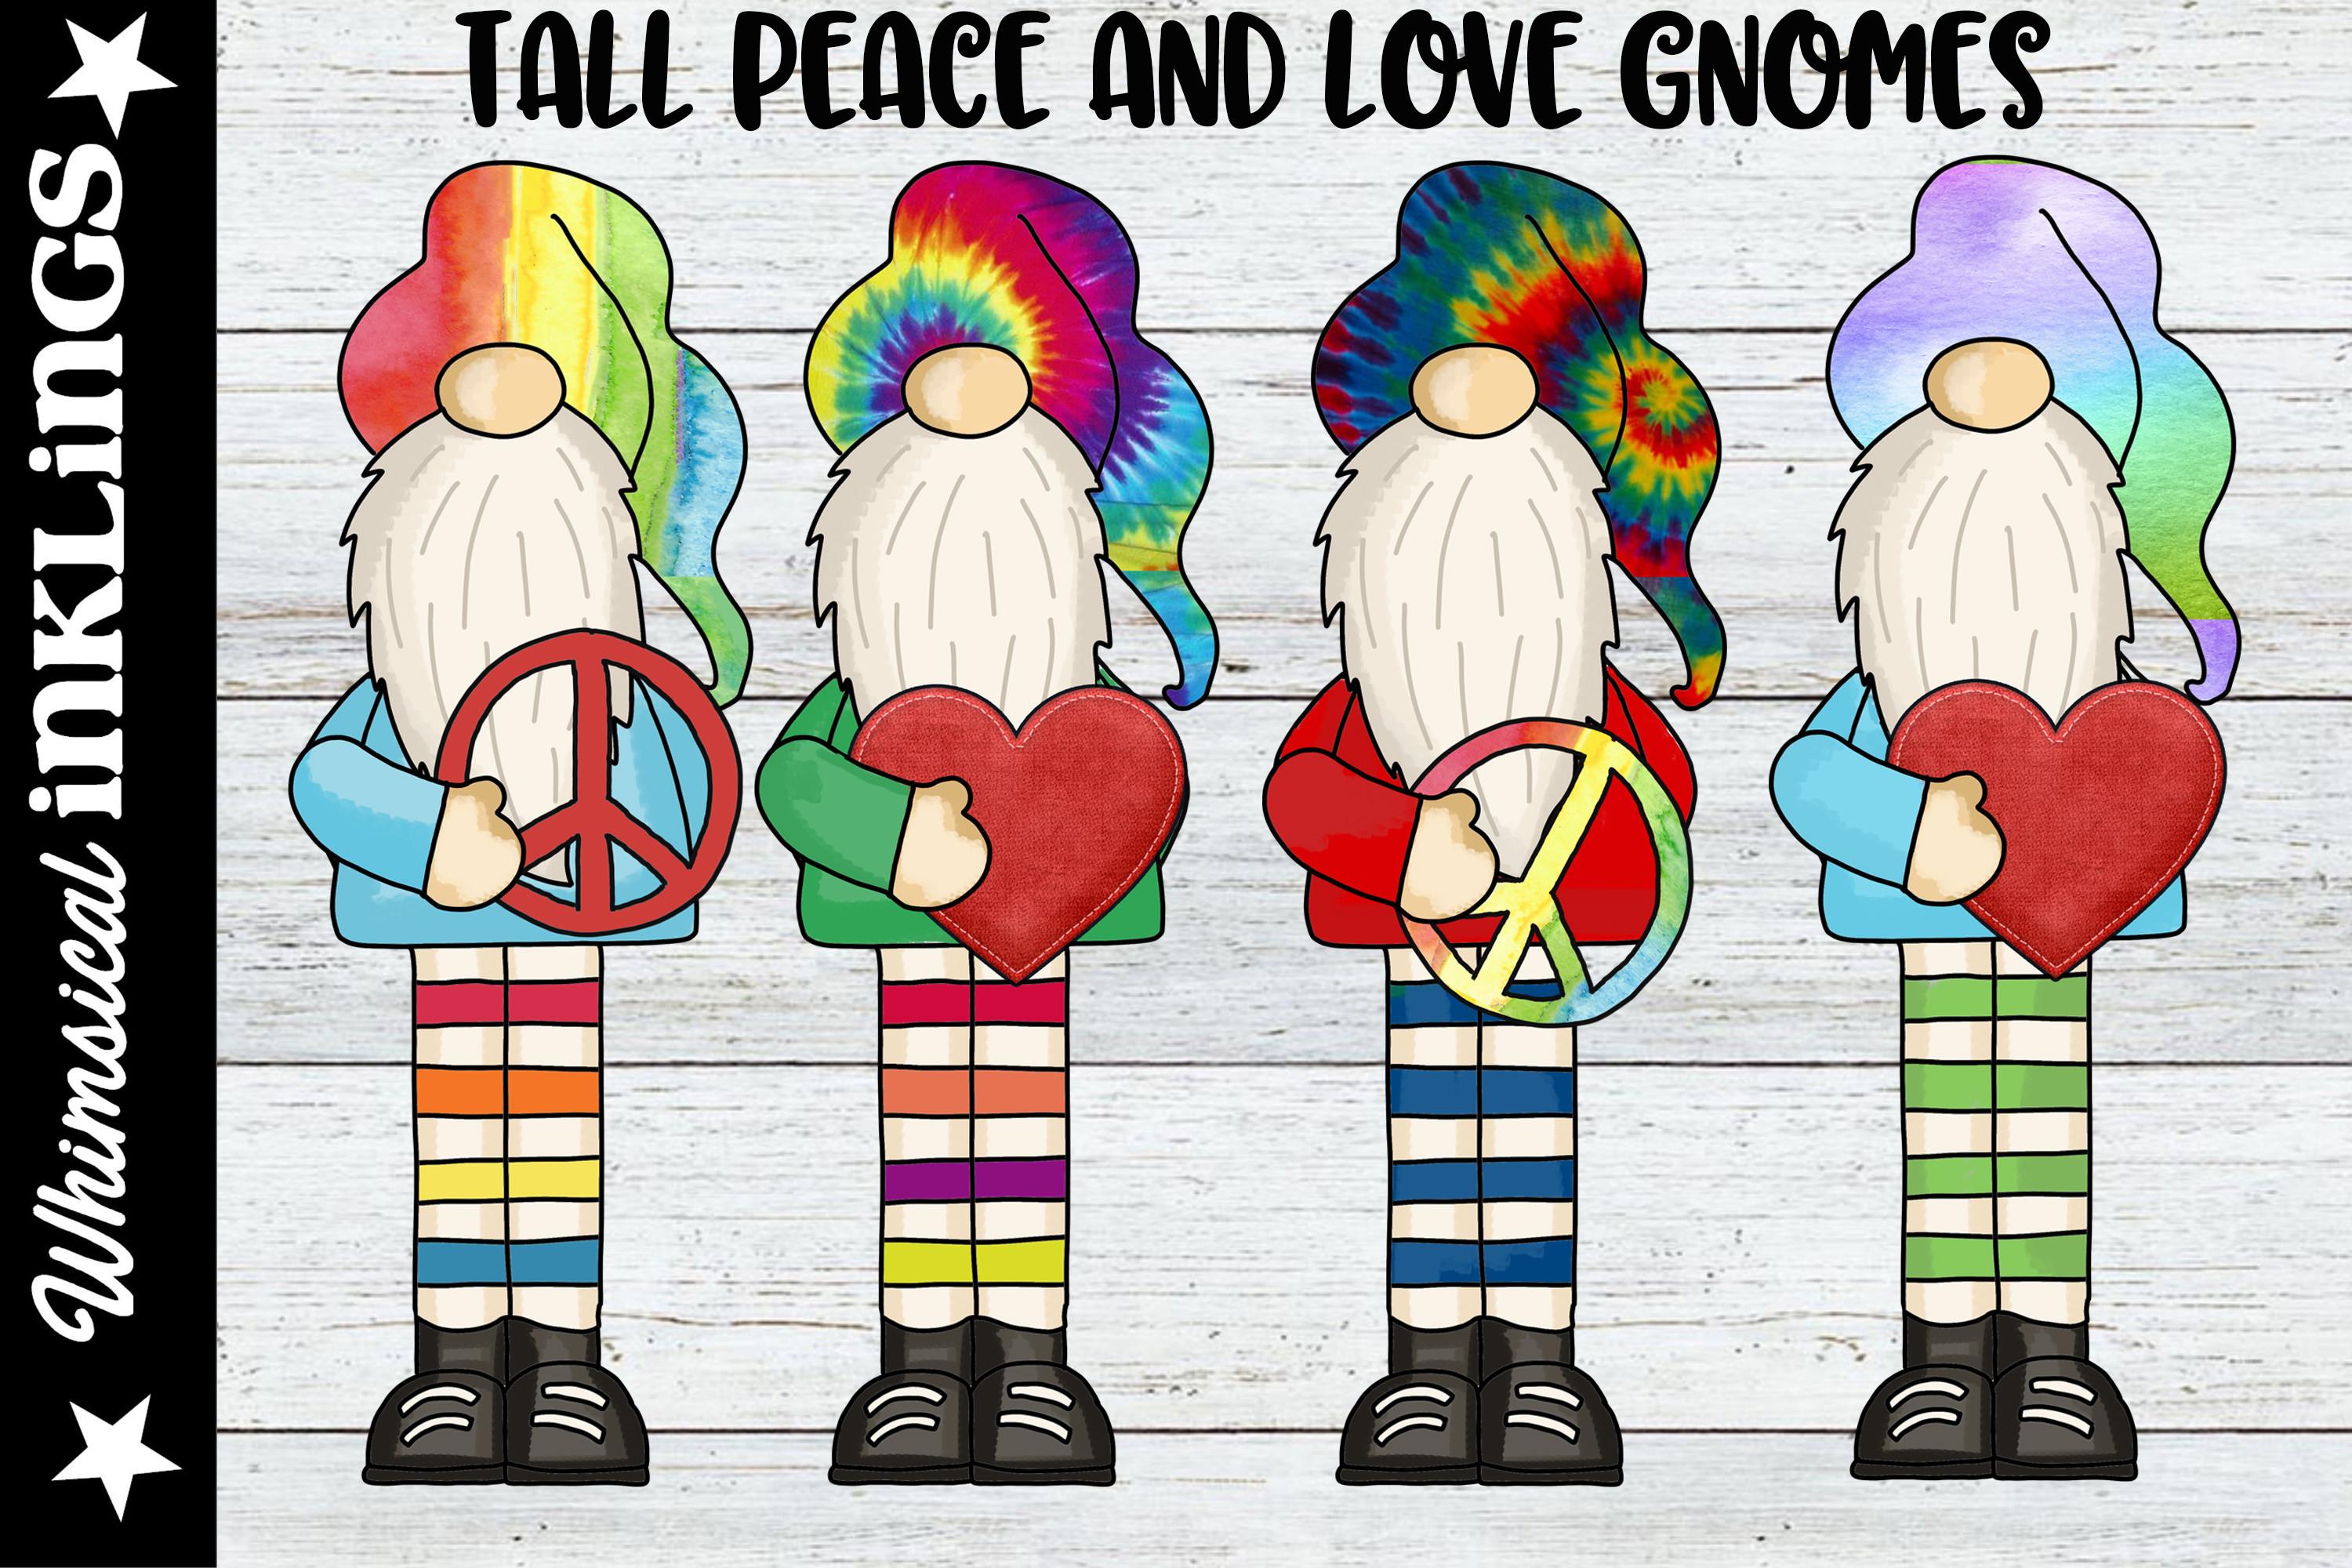 Tall Peace and Love Gnomes